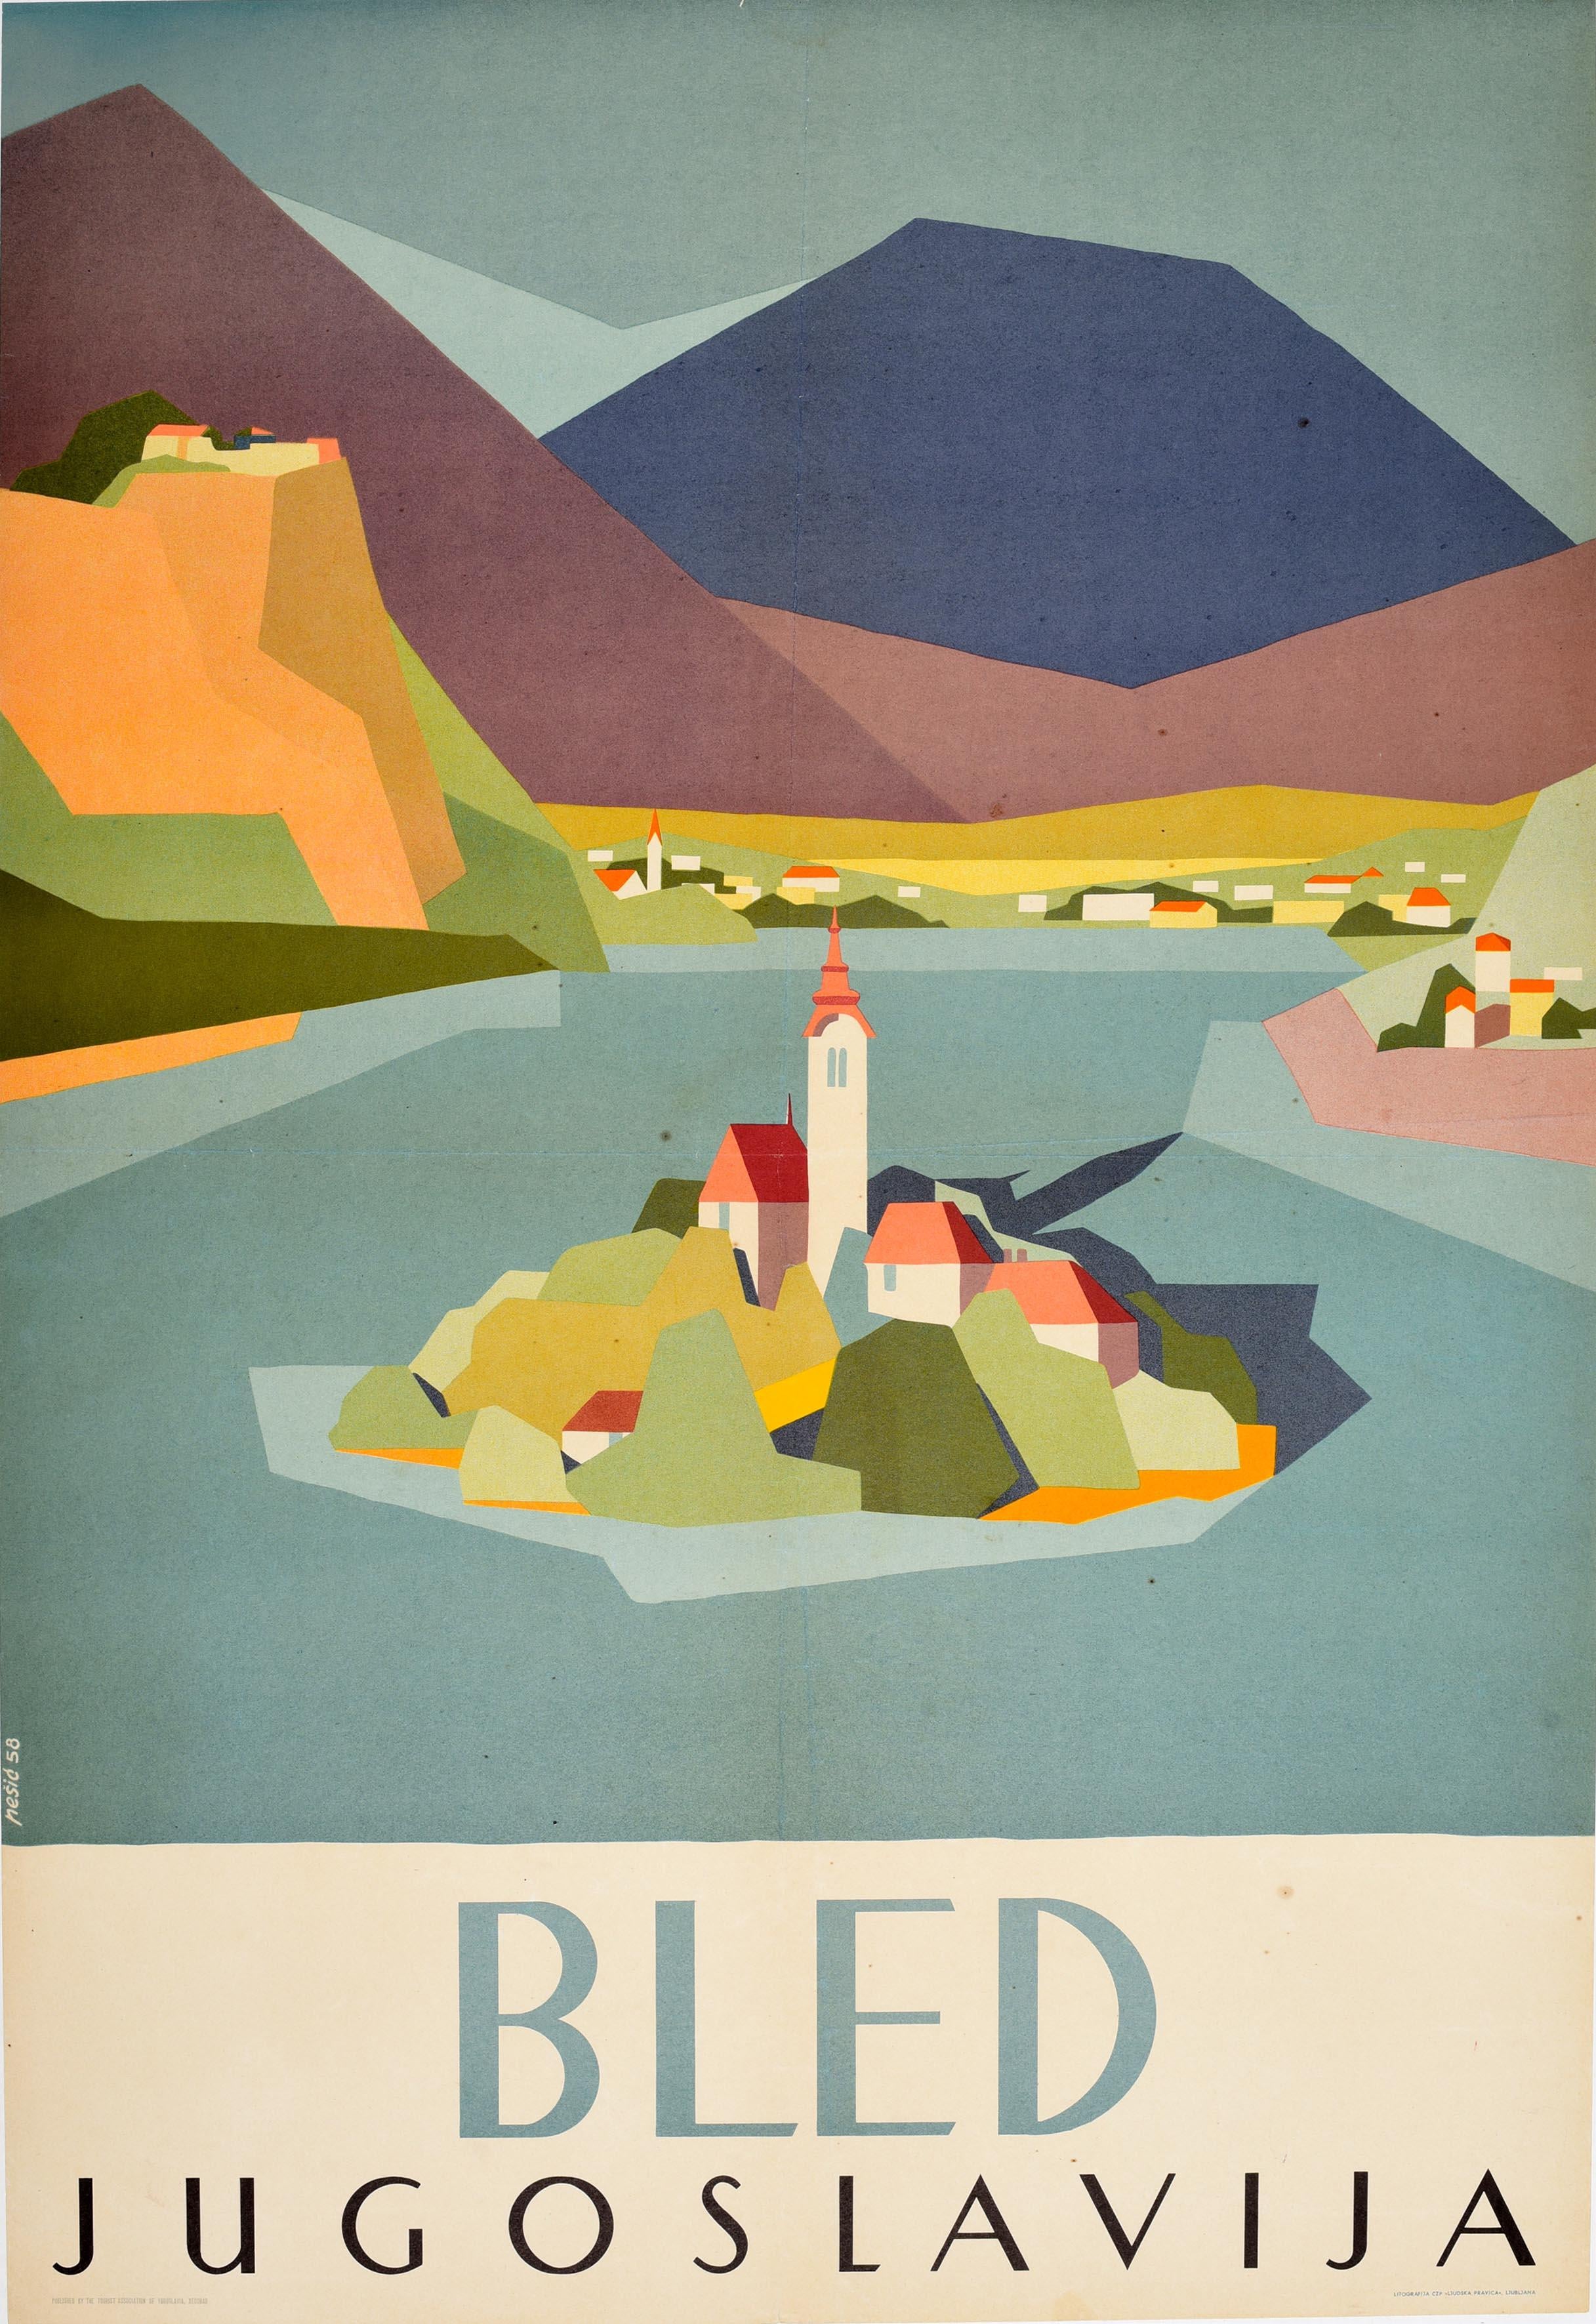 Original vintage mid-century design travel poster for Bled Jugoslavija / Yugoslavia (now Slovenia) featuring a colourful scenic view of Lake Bled with the church tower over the buildings and trees on Bled Island surrounded by calm blue water with